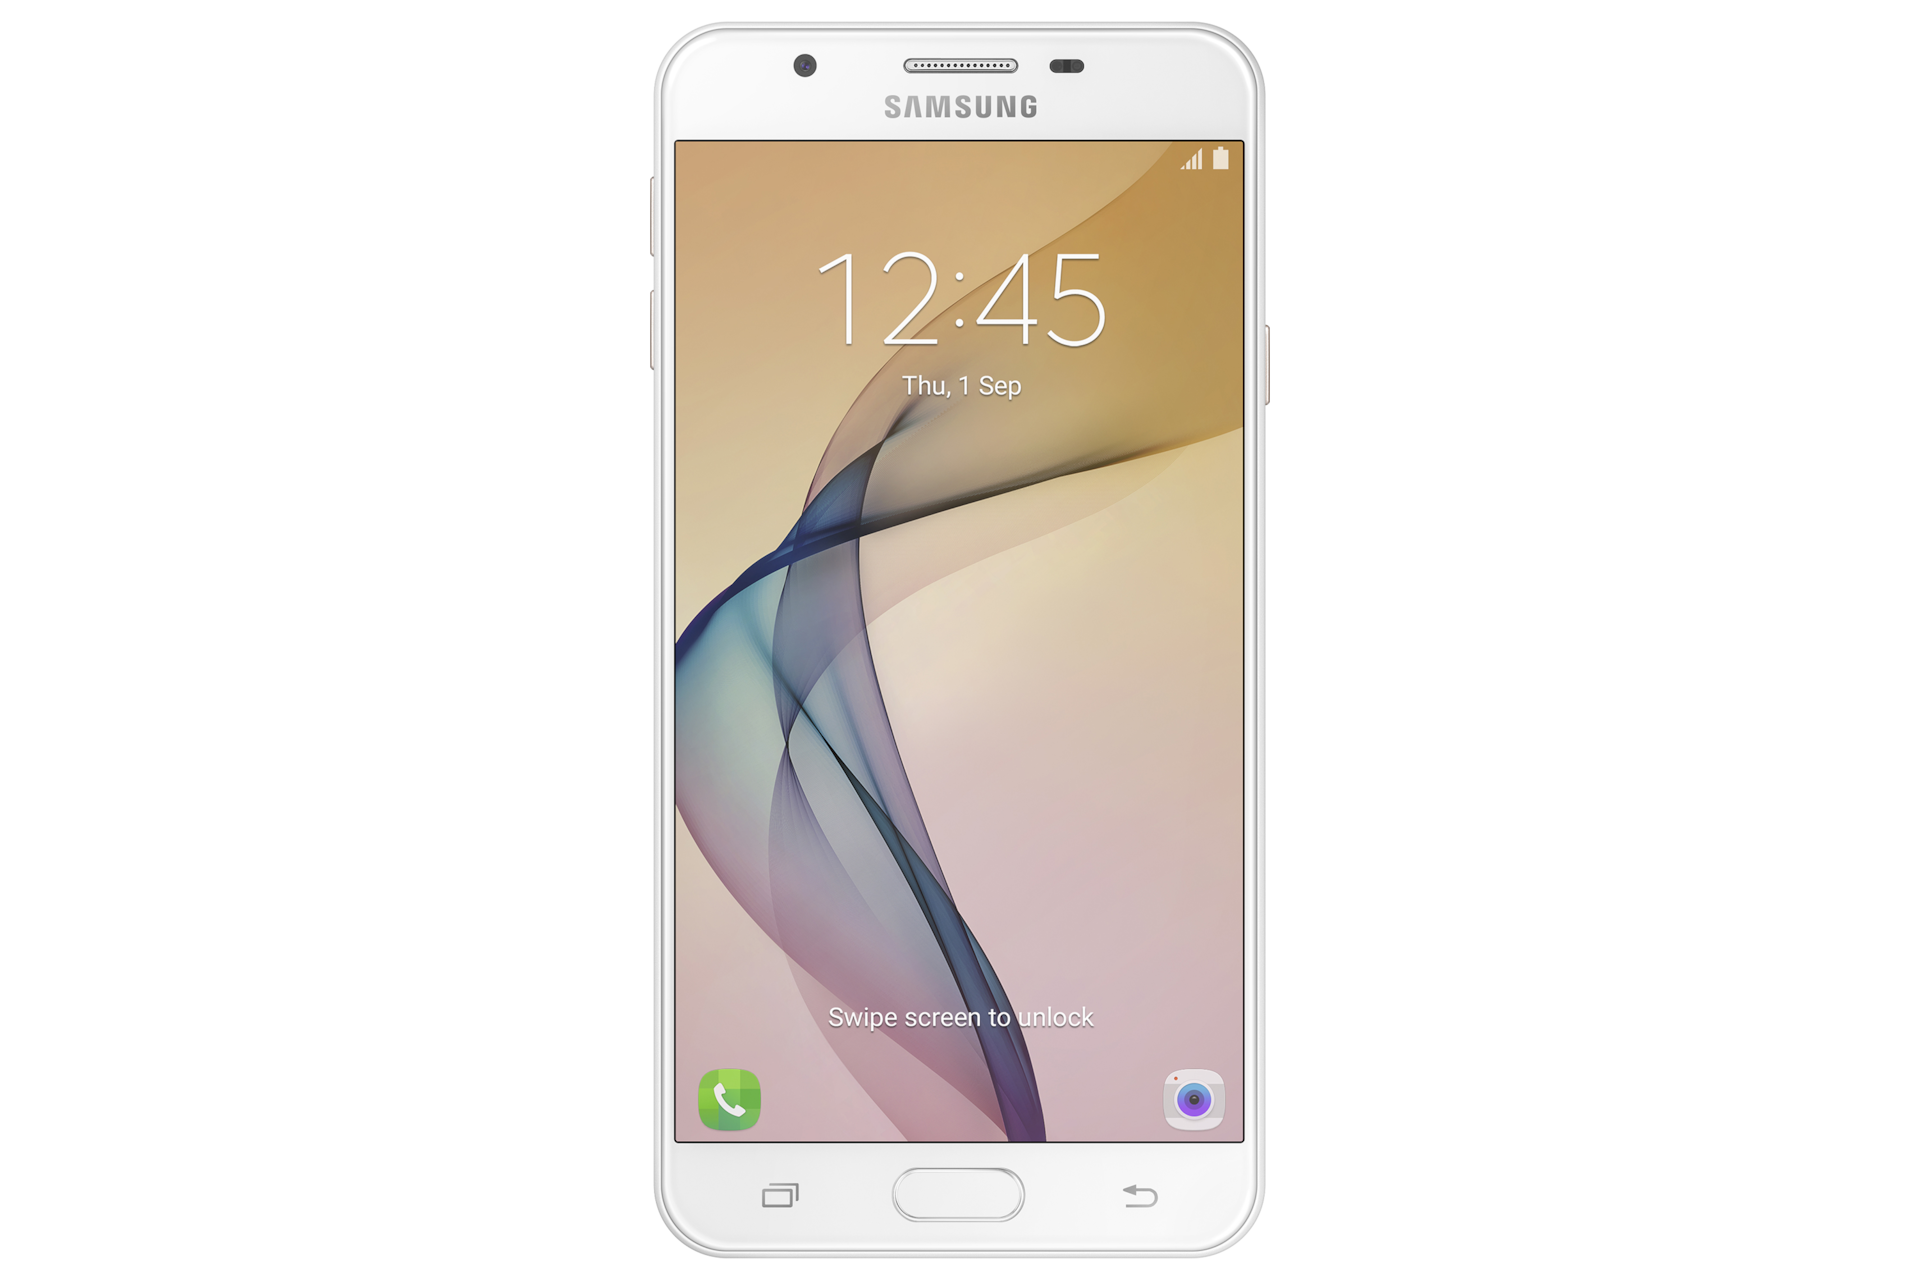 Compare G7 S3 Vs Samsung Galaxy J7 Prime Price Specs Review Gadgets Now